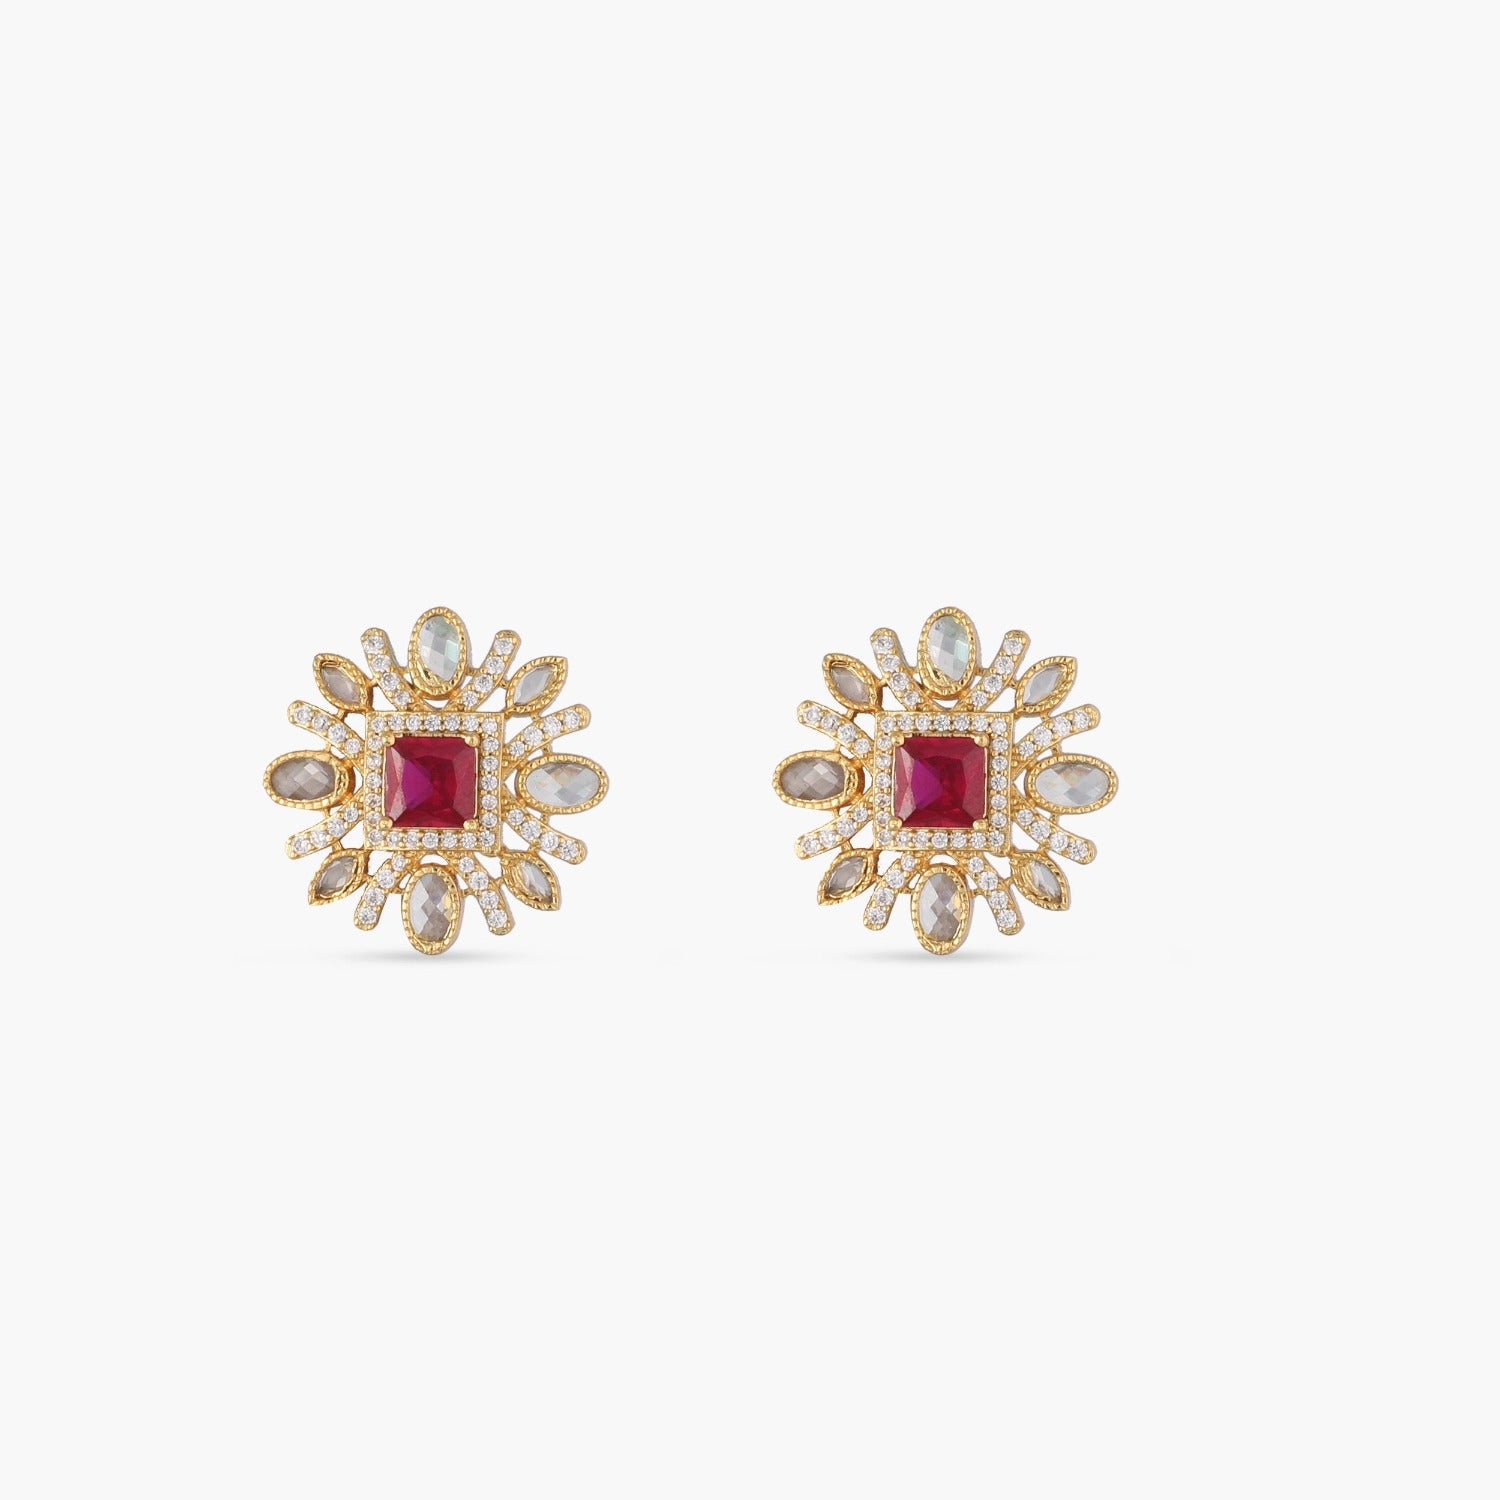 Buy Traditional South Indian Jewelry Daily Use Impon Studs Earrings